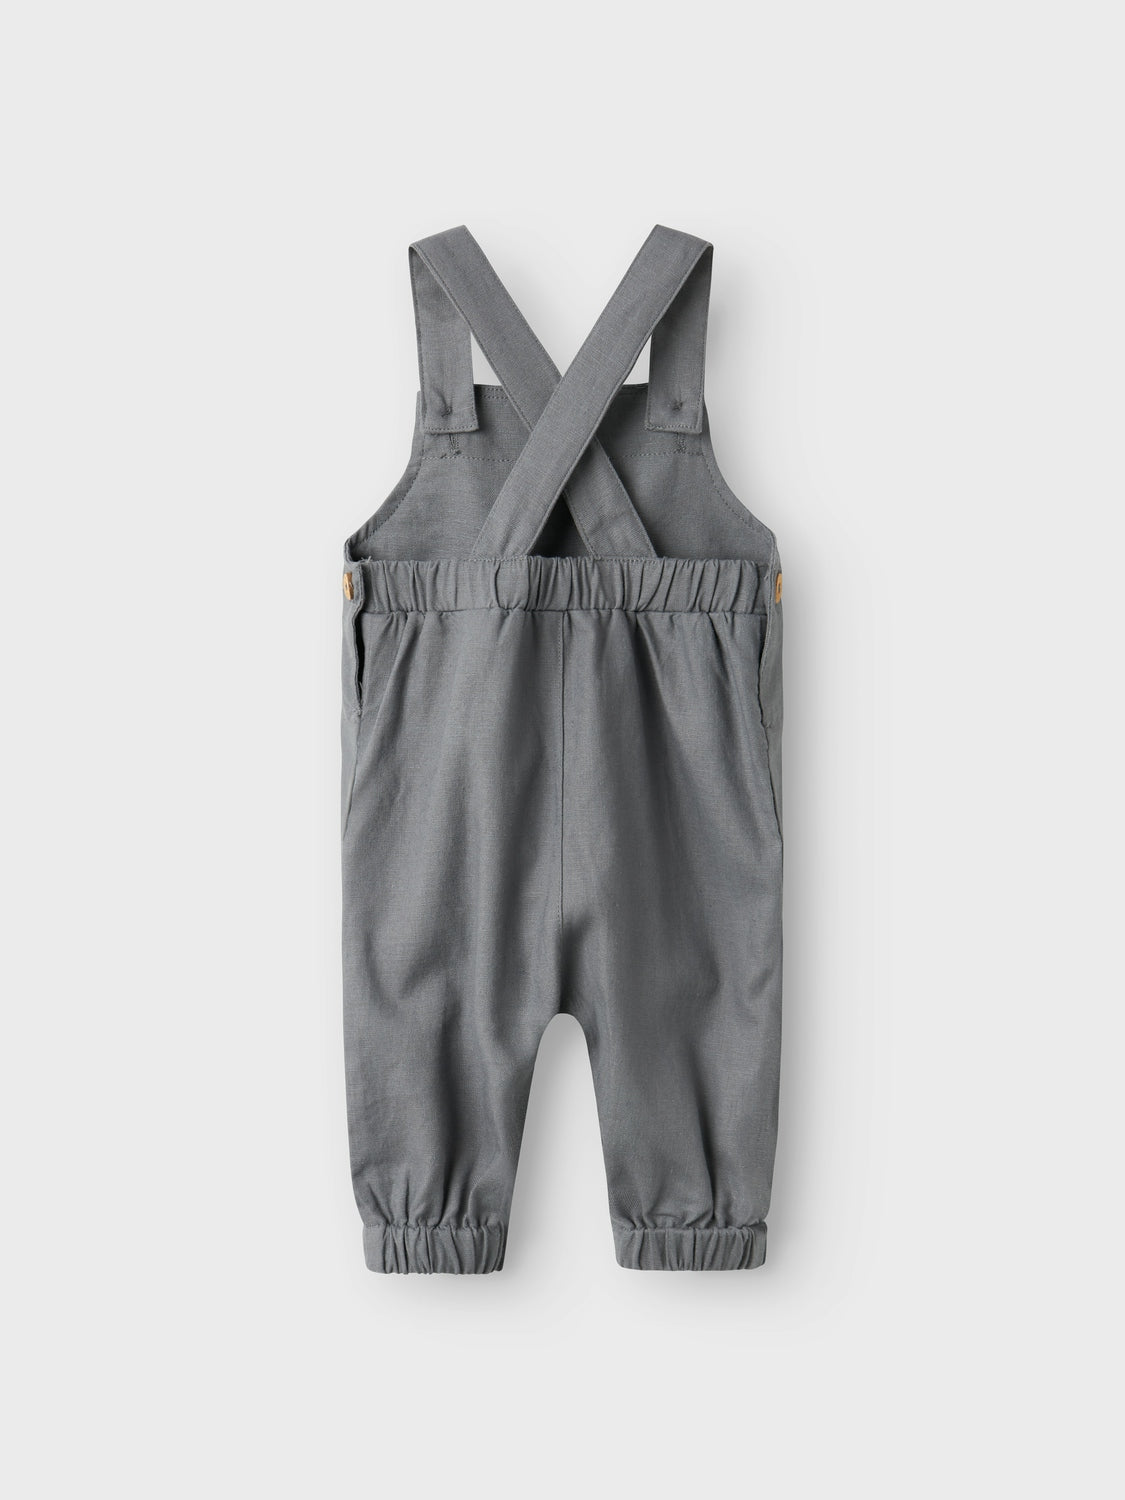 Lil Atelier Felix Overall - Quiet Shade